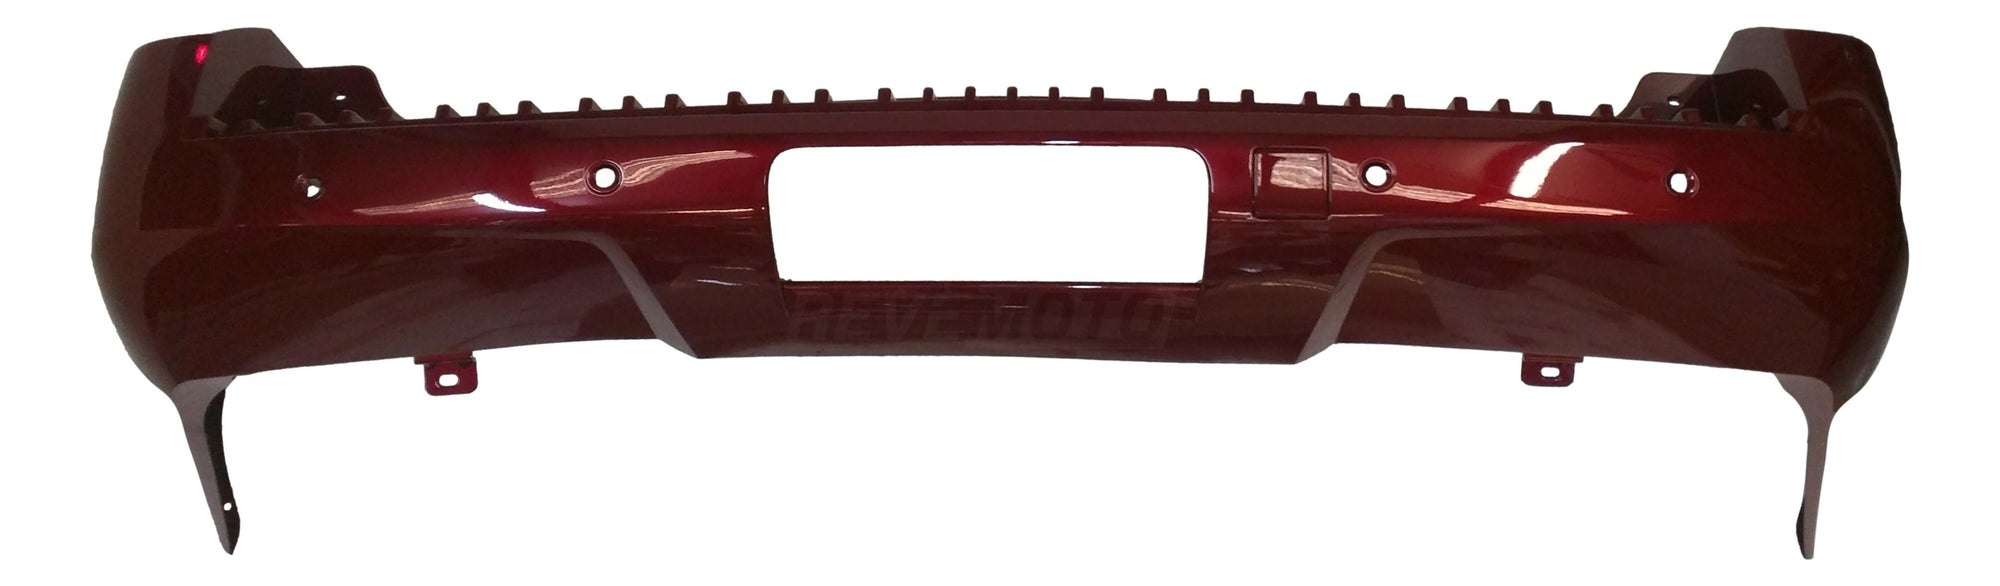 2009 Chevrolet Tahoe Rear Bumper Painted Red Jewel Tintcoat Metallic (WA301N), With Parking Sensors, Without Off-Road Package